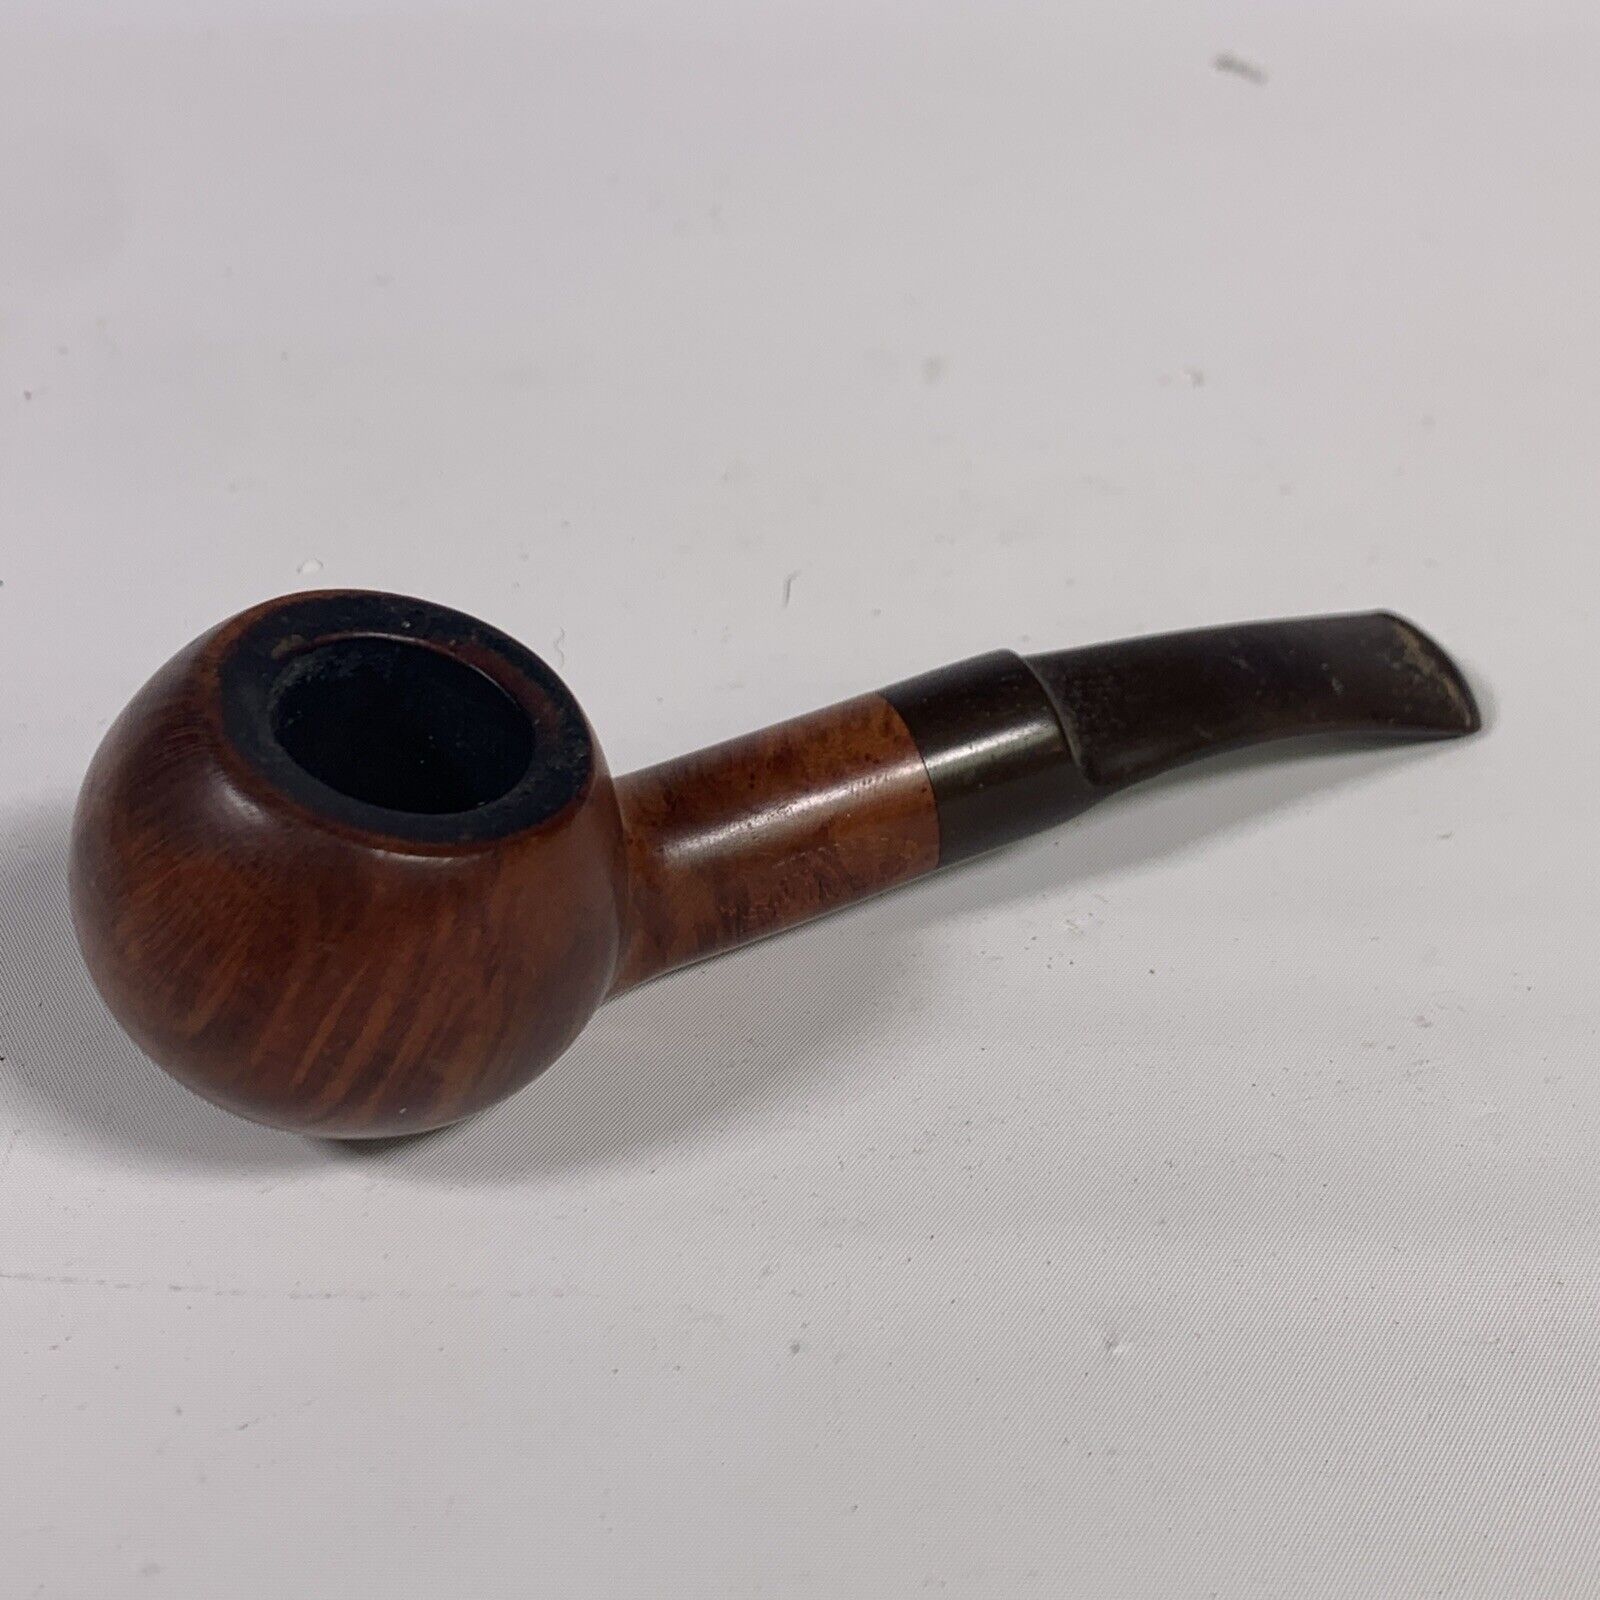 Vintage The Tinder Box St. Ives 7160 Tobacco Pipe France Tobacciana Clean